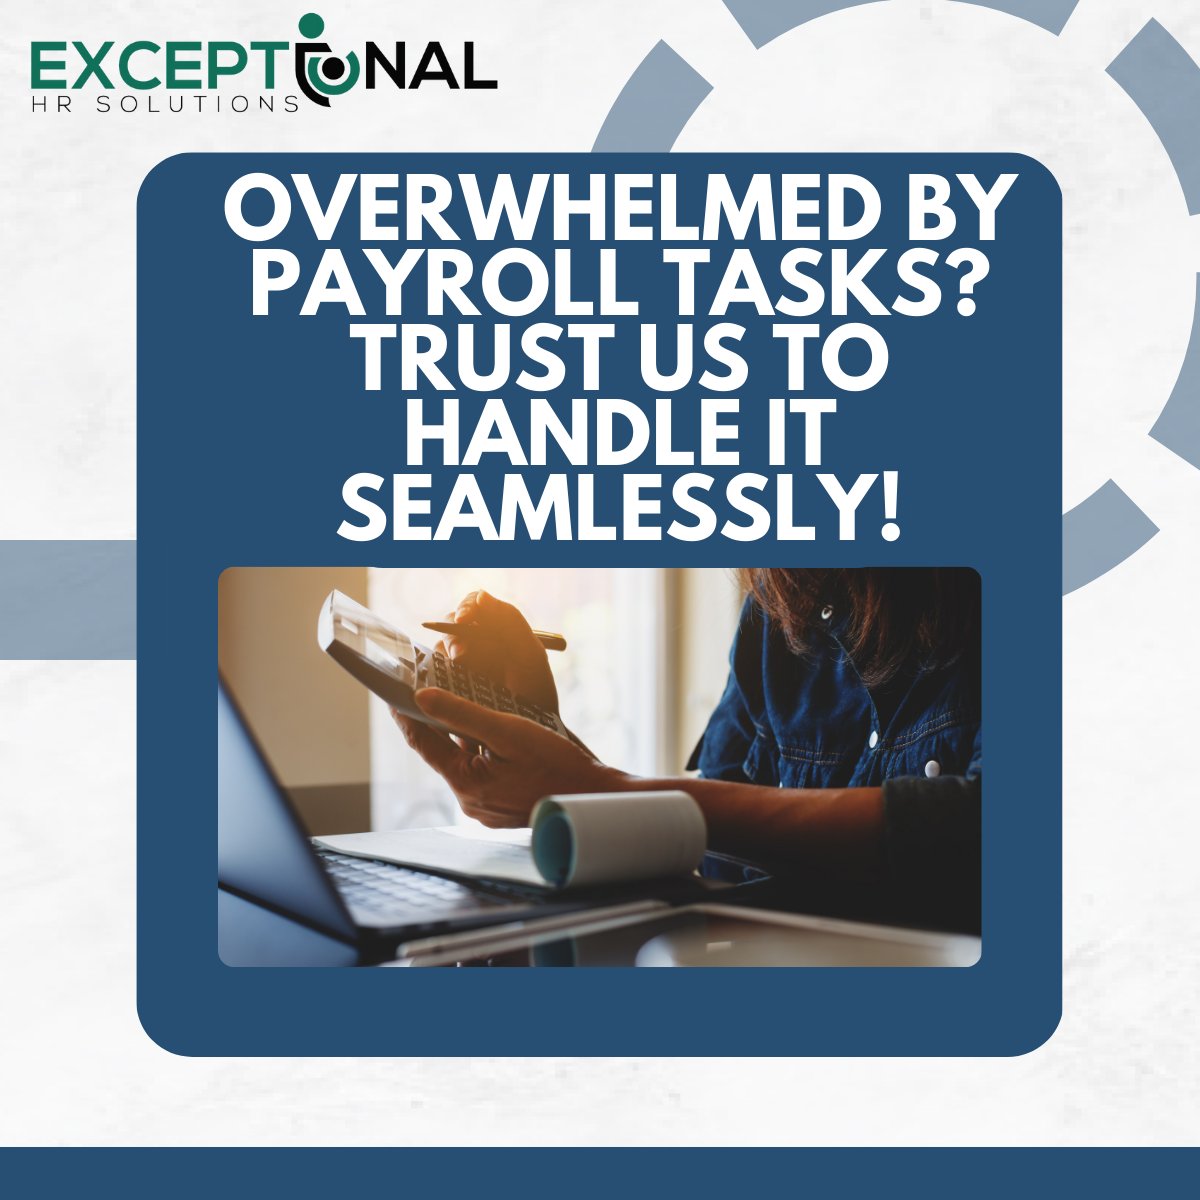 Drive productivity and accuracy in your business operations with our payroll solutions!
#payroll #payrollservices #hr #HumanResources
Contact us at Payroll@exceptionalhrsolutions.com
Schedule a meeting: tidycal.com/exceptionalhrs… 

@exceptionalhrs